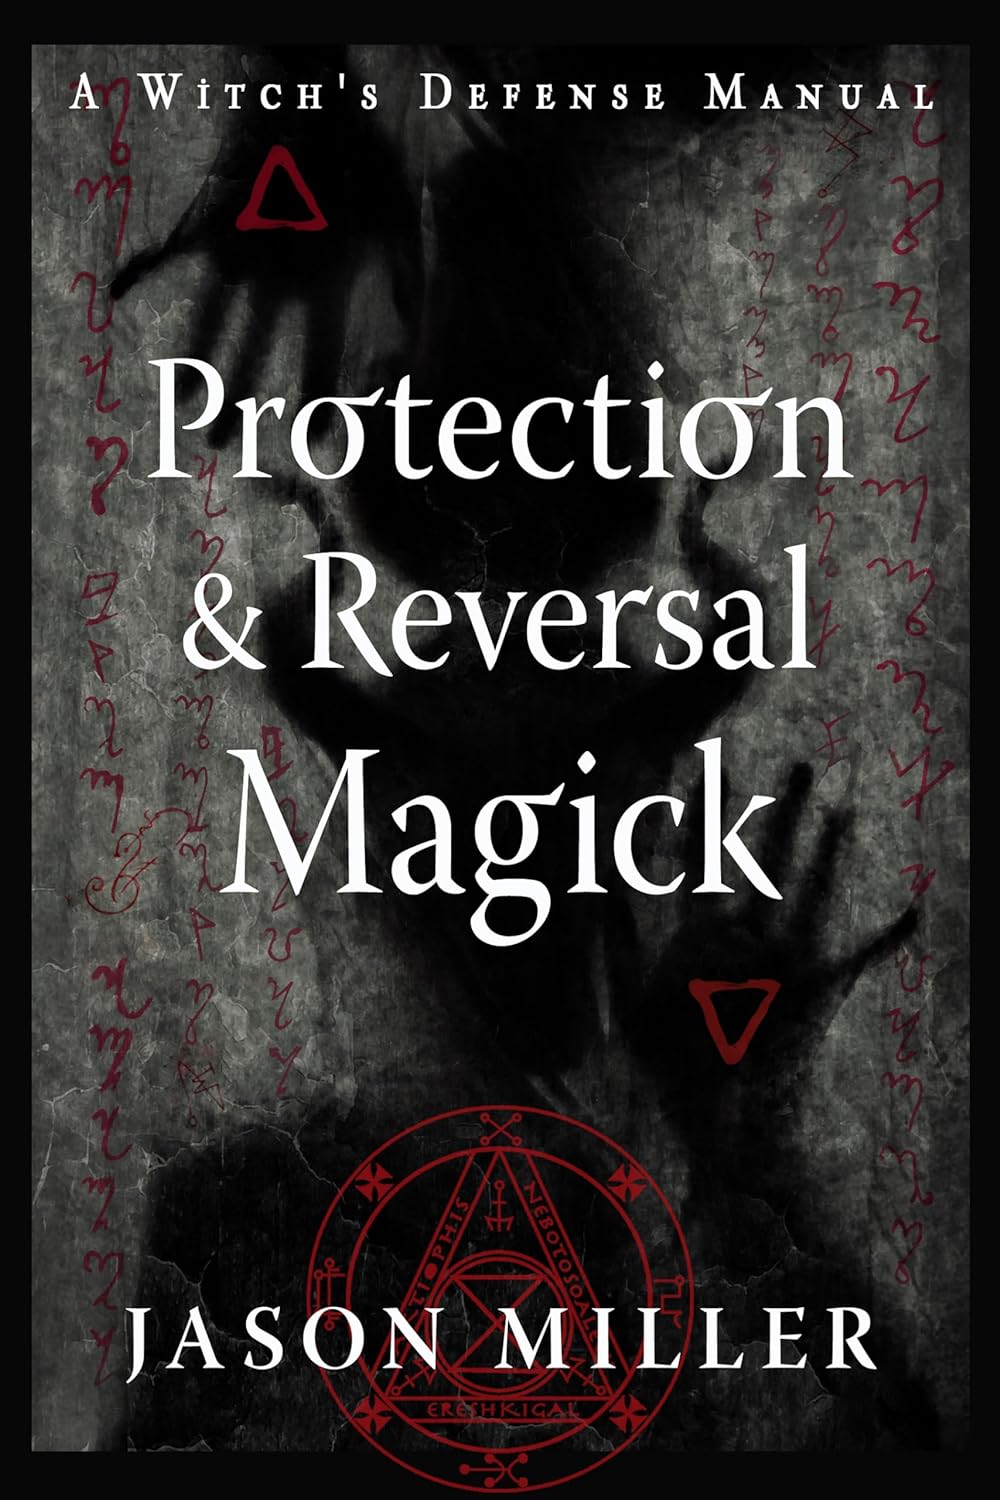 Protection & Reversal Magick (revised And Updated Edition): A Witch's Defense Manual